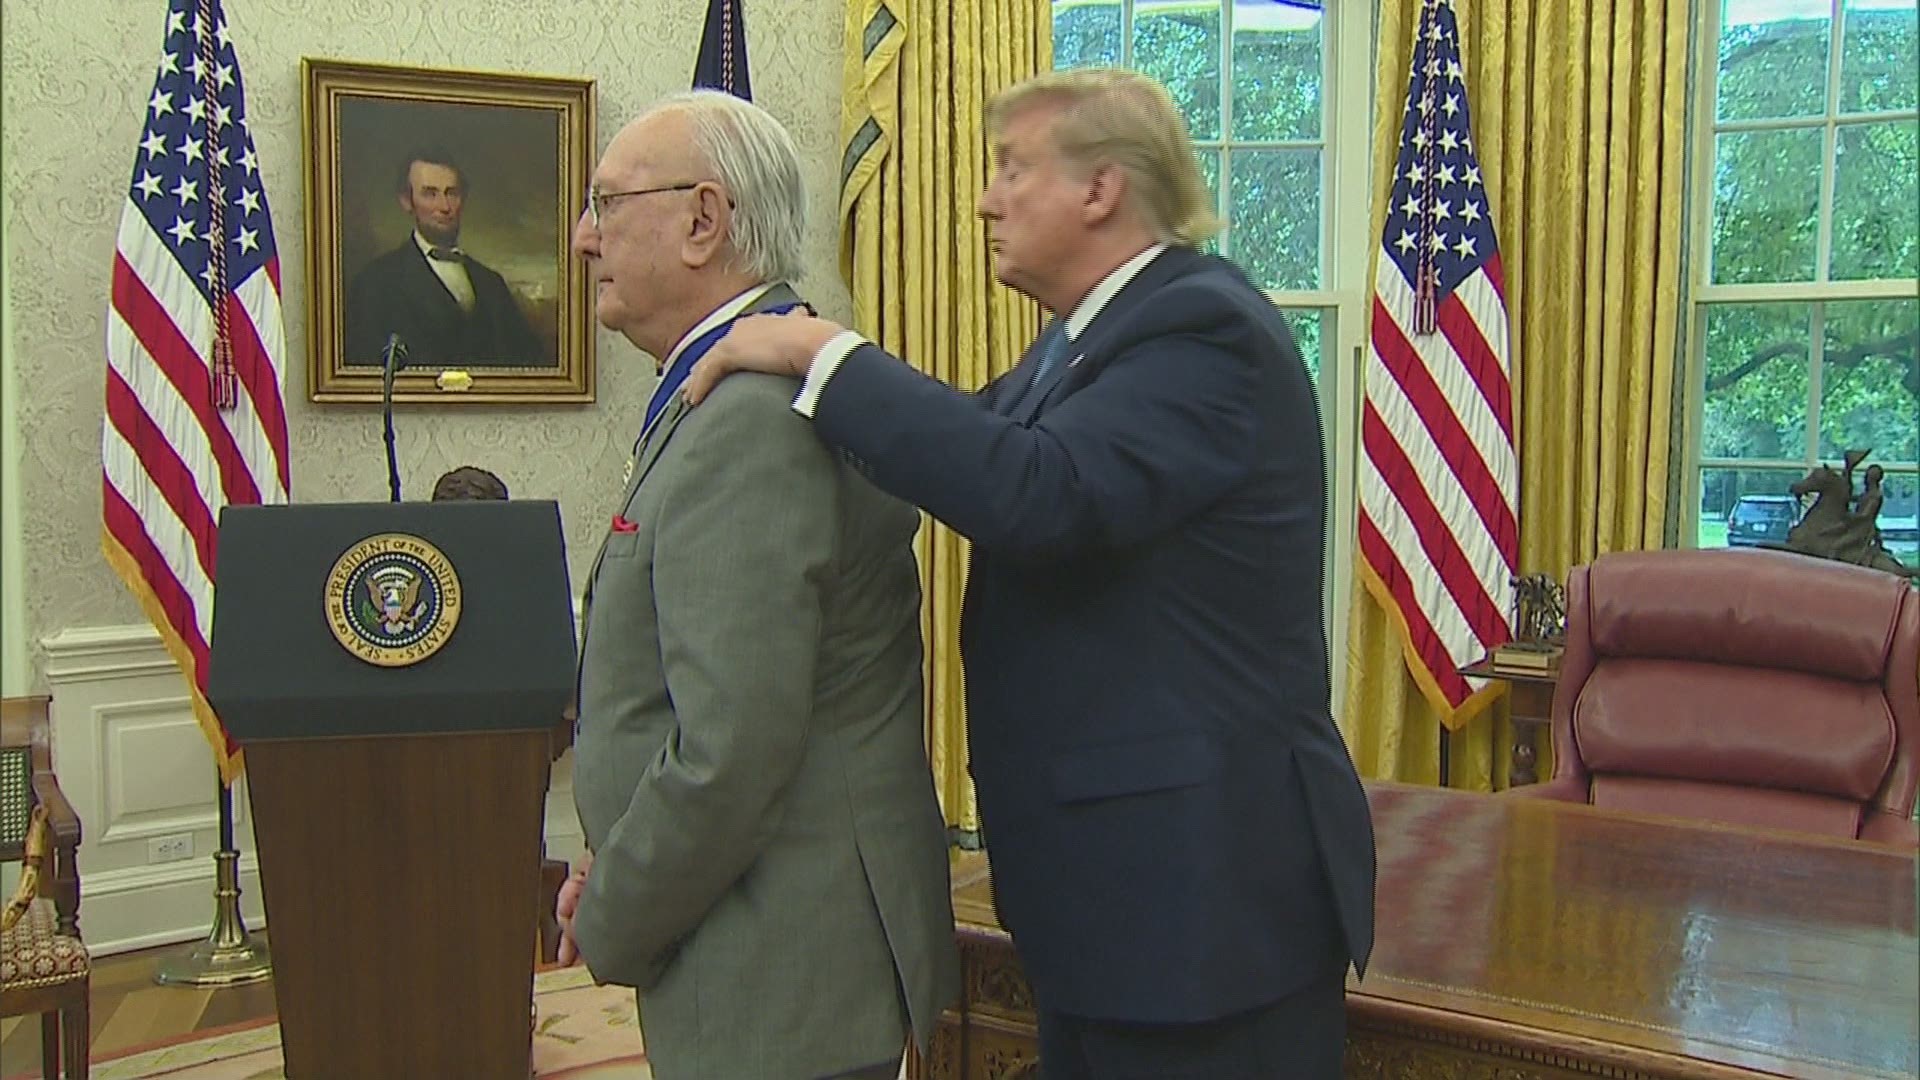 Trump awards Medal of Freedom to NBA Hall of Famer Bob Cousy